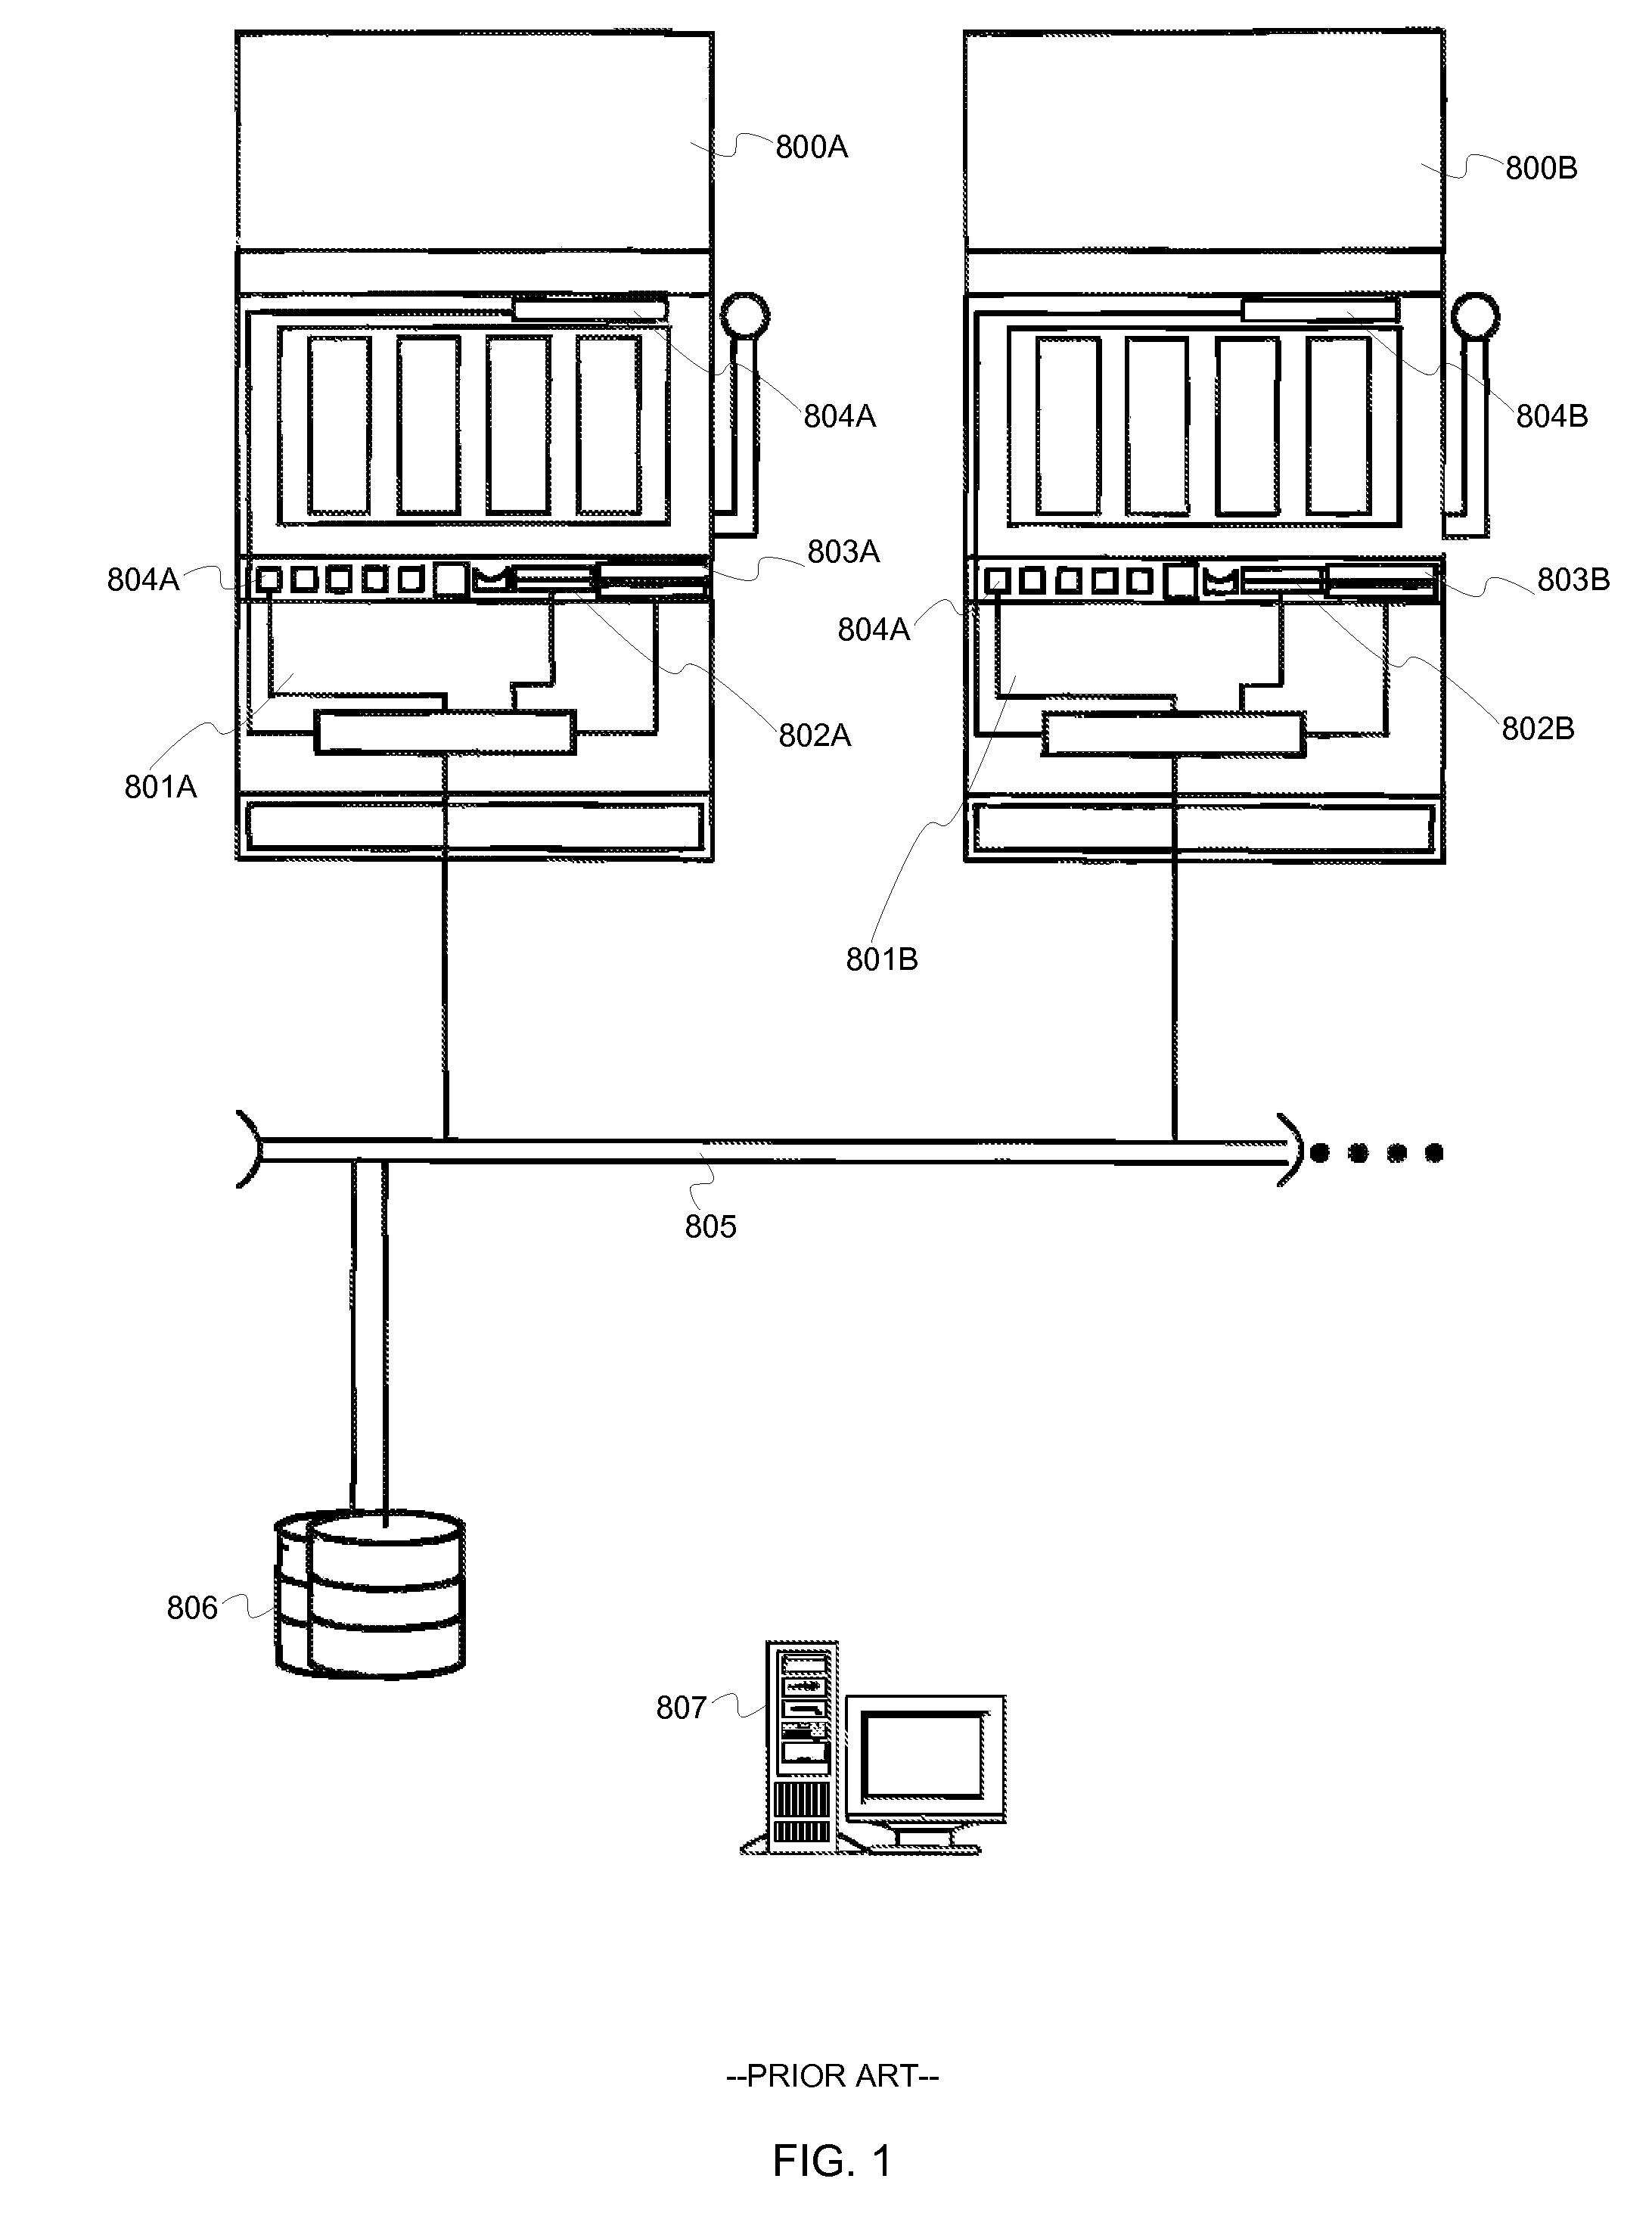 Ticket management apparatus, a ticketing device and a data management system for cashless operation